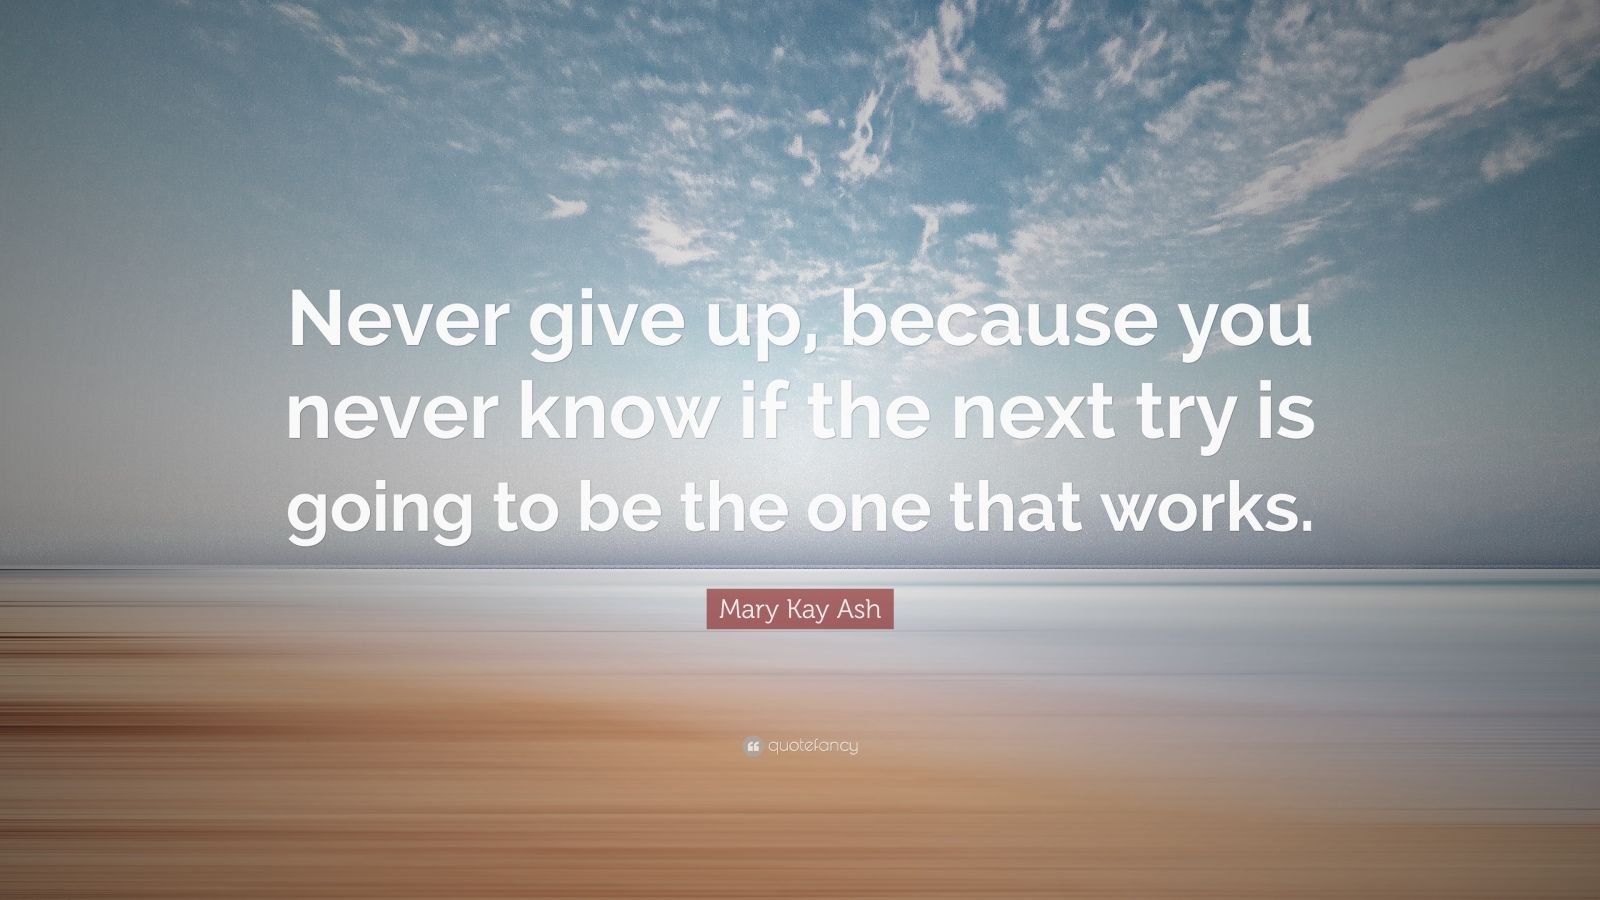 Mary Kay Ash Quote: "Never give up, because you never know ...